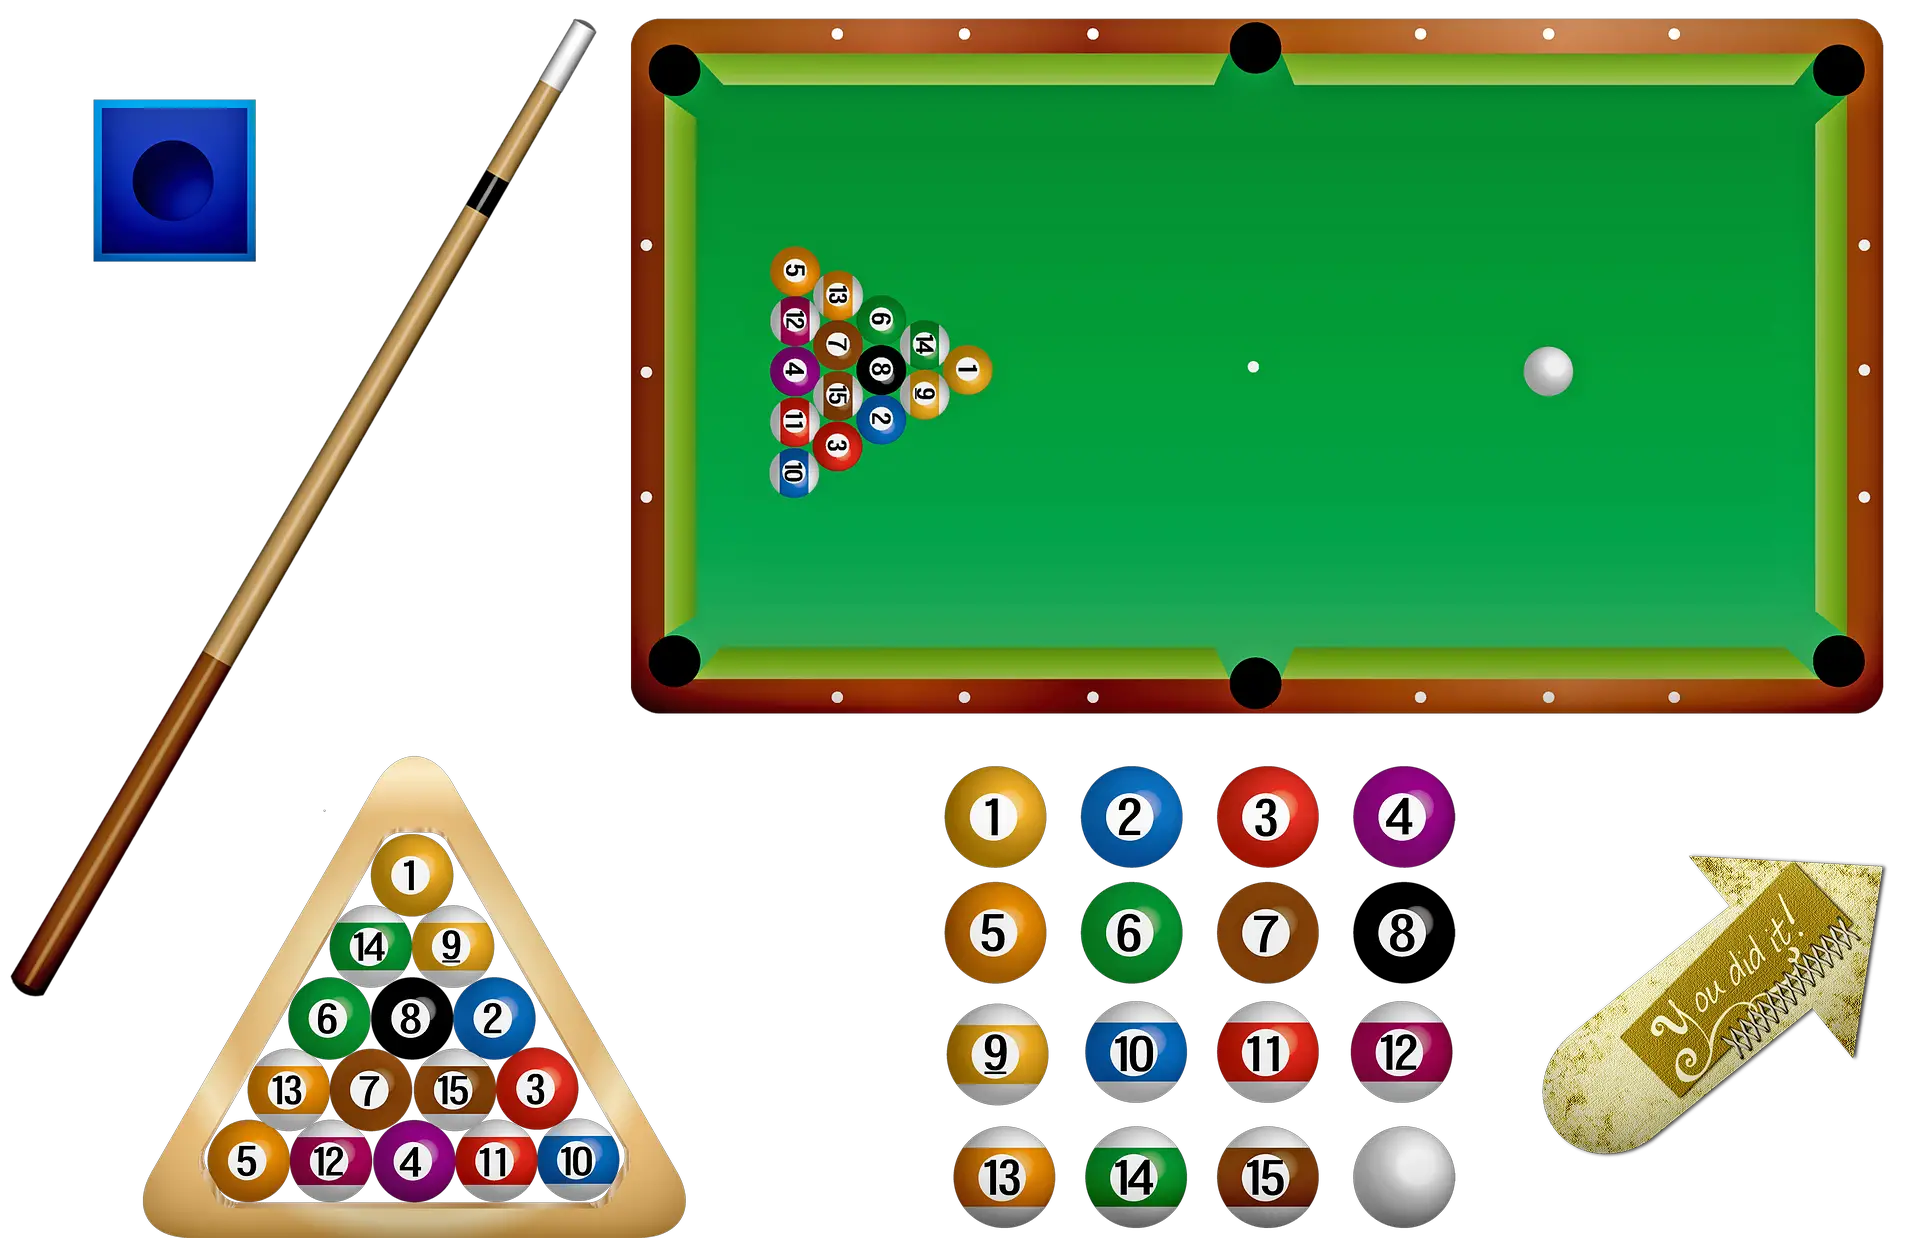 Snooker Balls Vs Pool Balls: What’s The Difference?